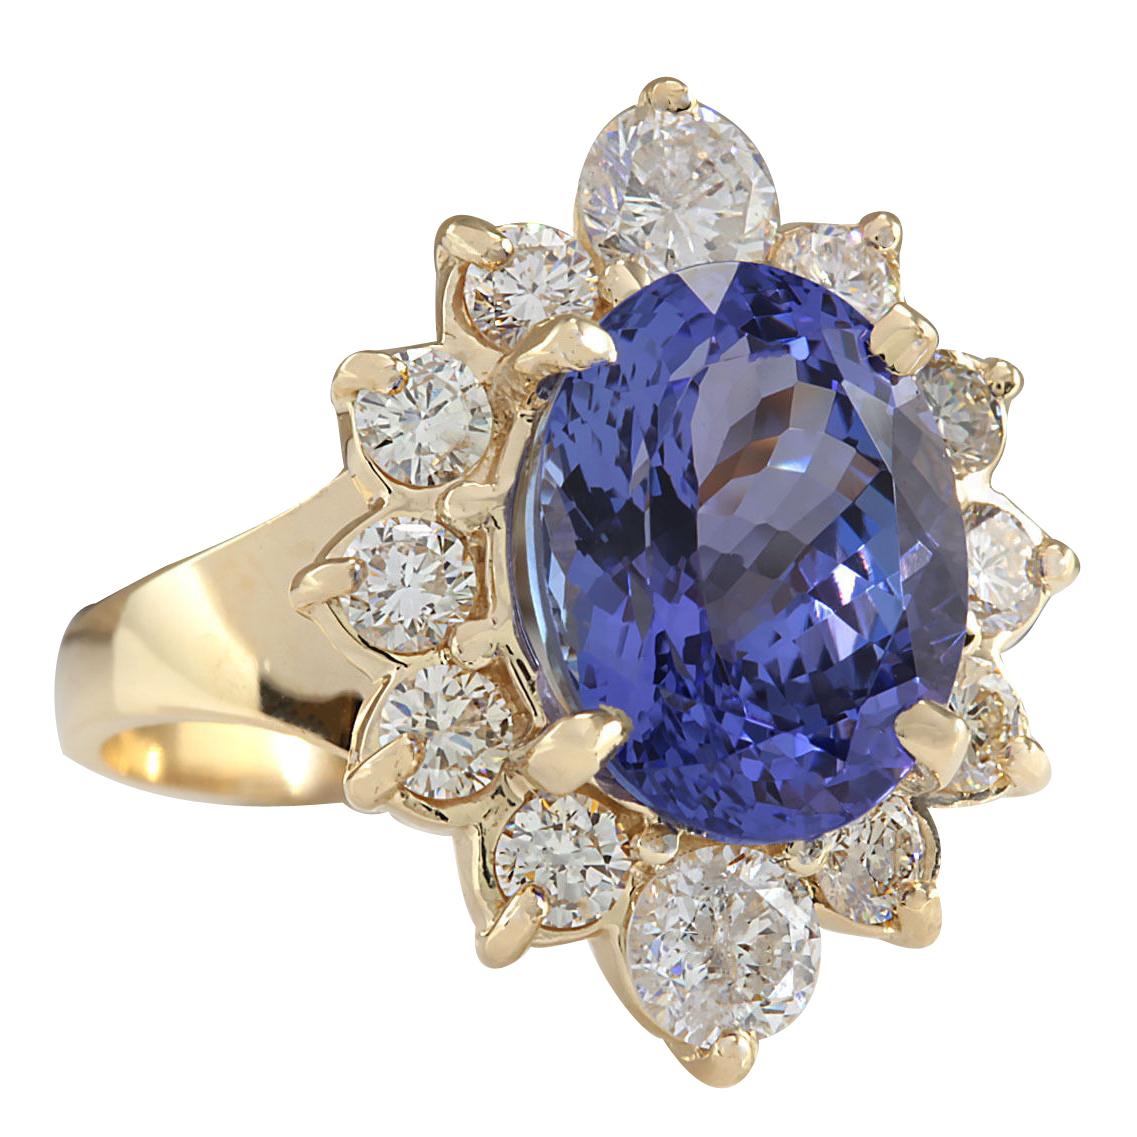 Behold the elegance of our 6.18 Carat Tanzanite 14 Karat Yellow Gold Diamond Ring. Impeccably crafted and stamped with 14K yellow gold, this masterpiece boasts a total ring weight of 6.6 grams. The centerpiece is a mesmerizing 4.93-carat tanzanite,